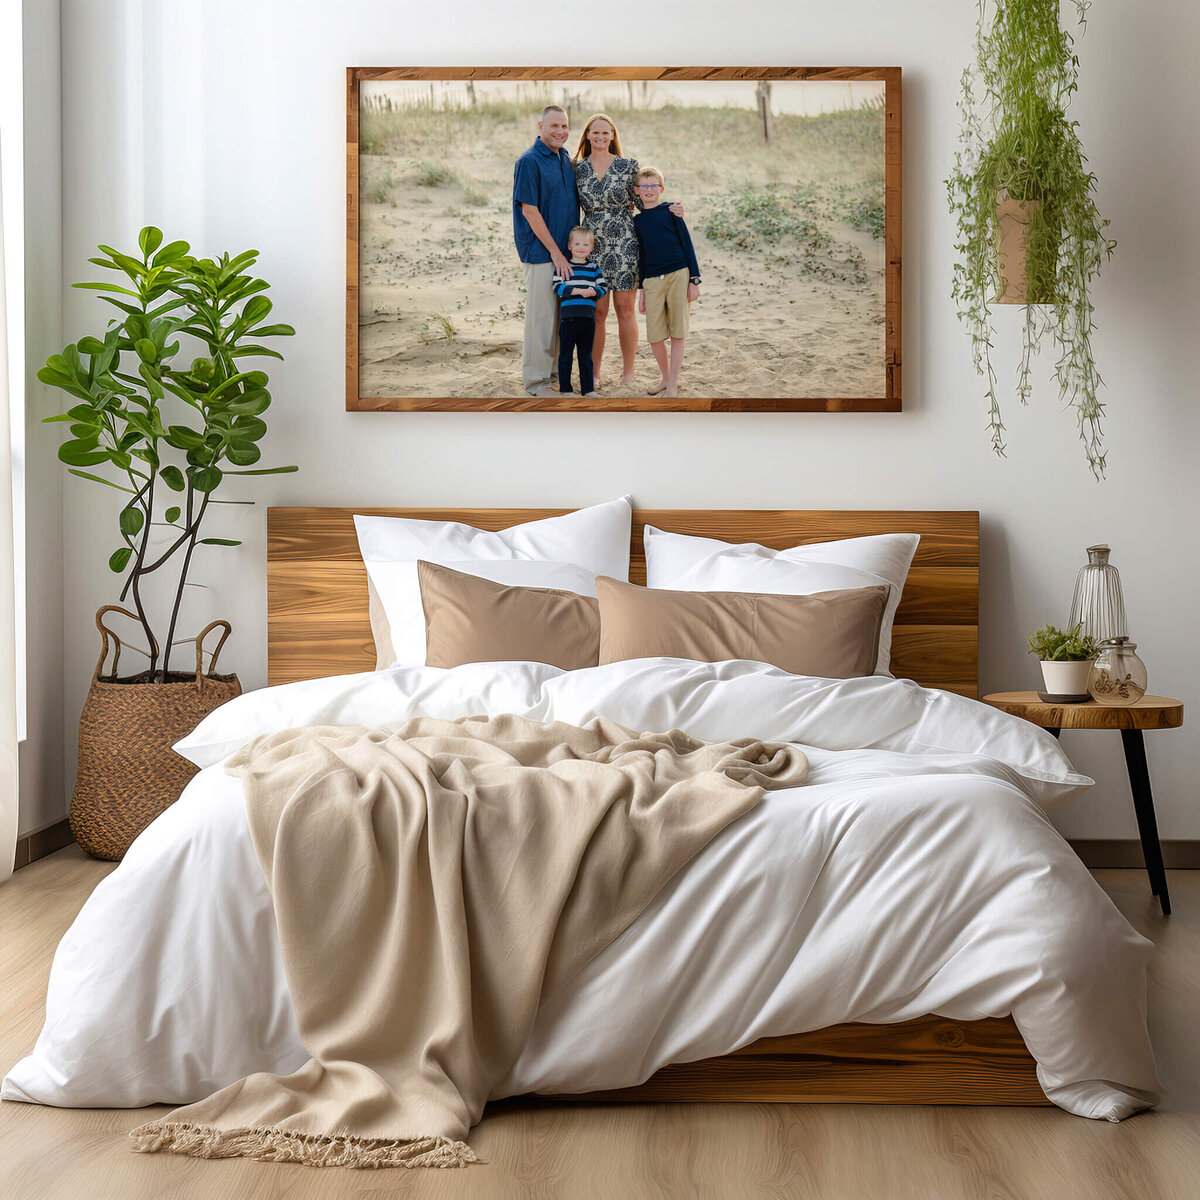 A family of four, all wearing blue, are pictured at the beach. The picture is framed and hanging above a bed made in white with brown accents.